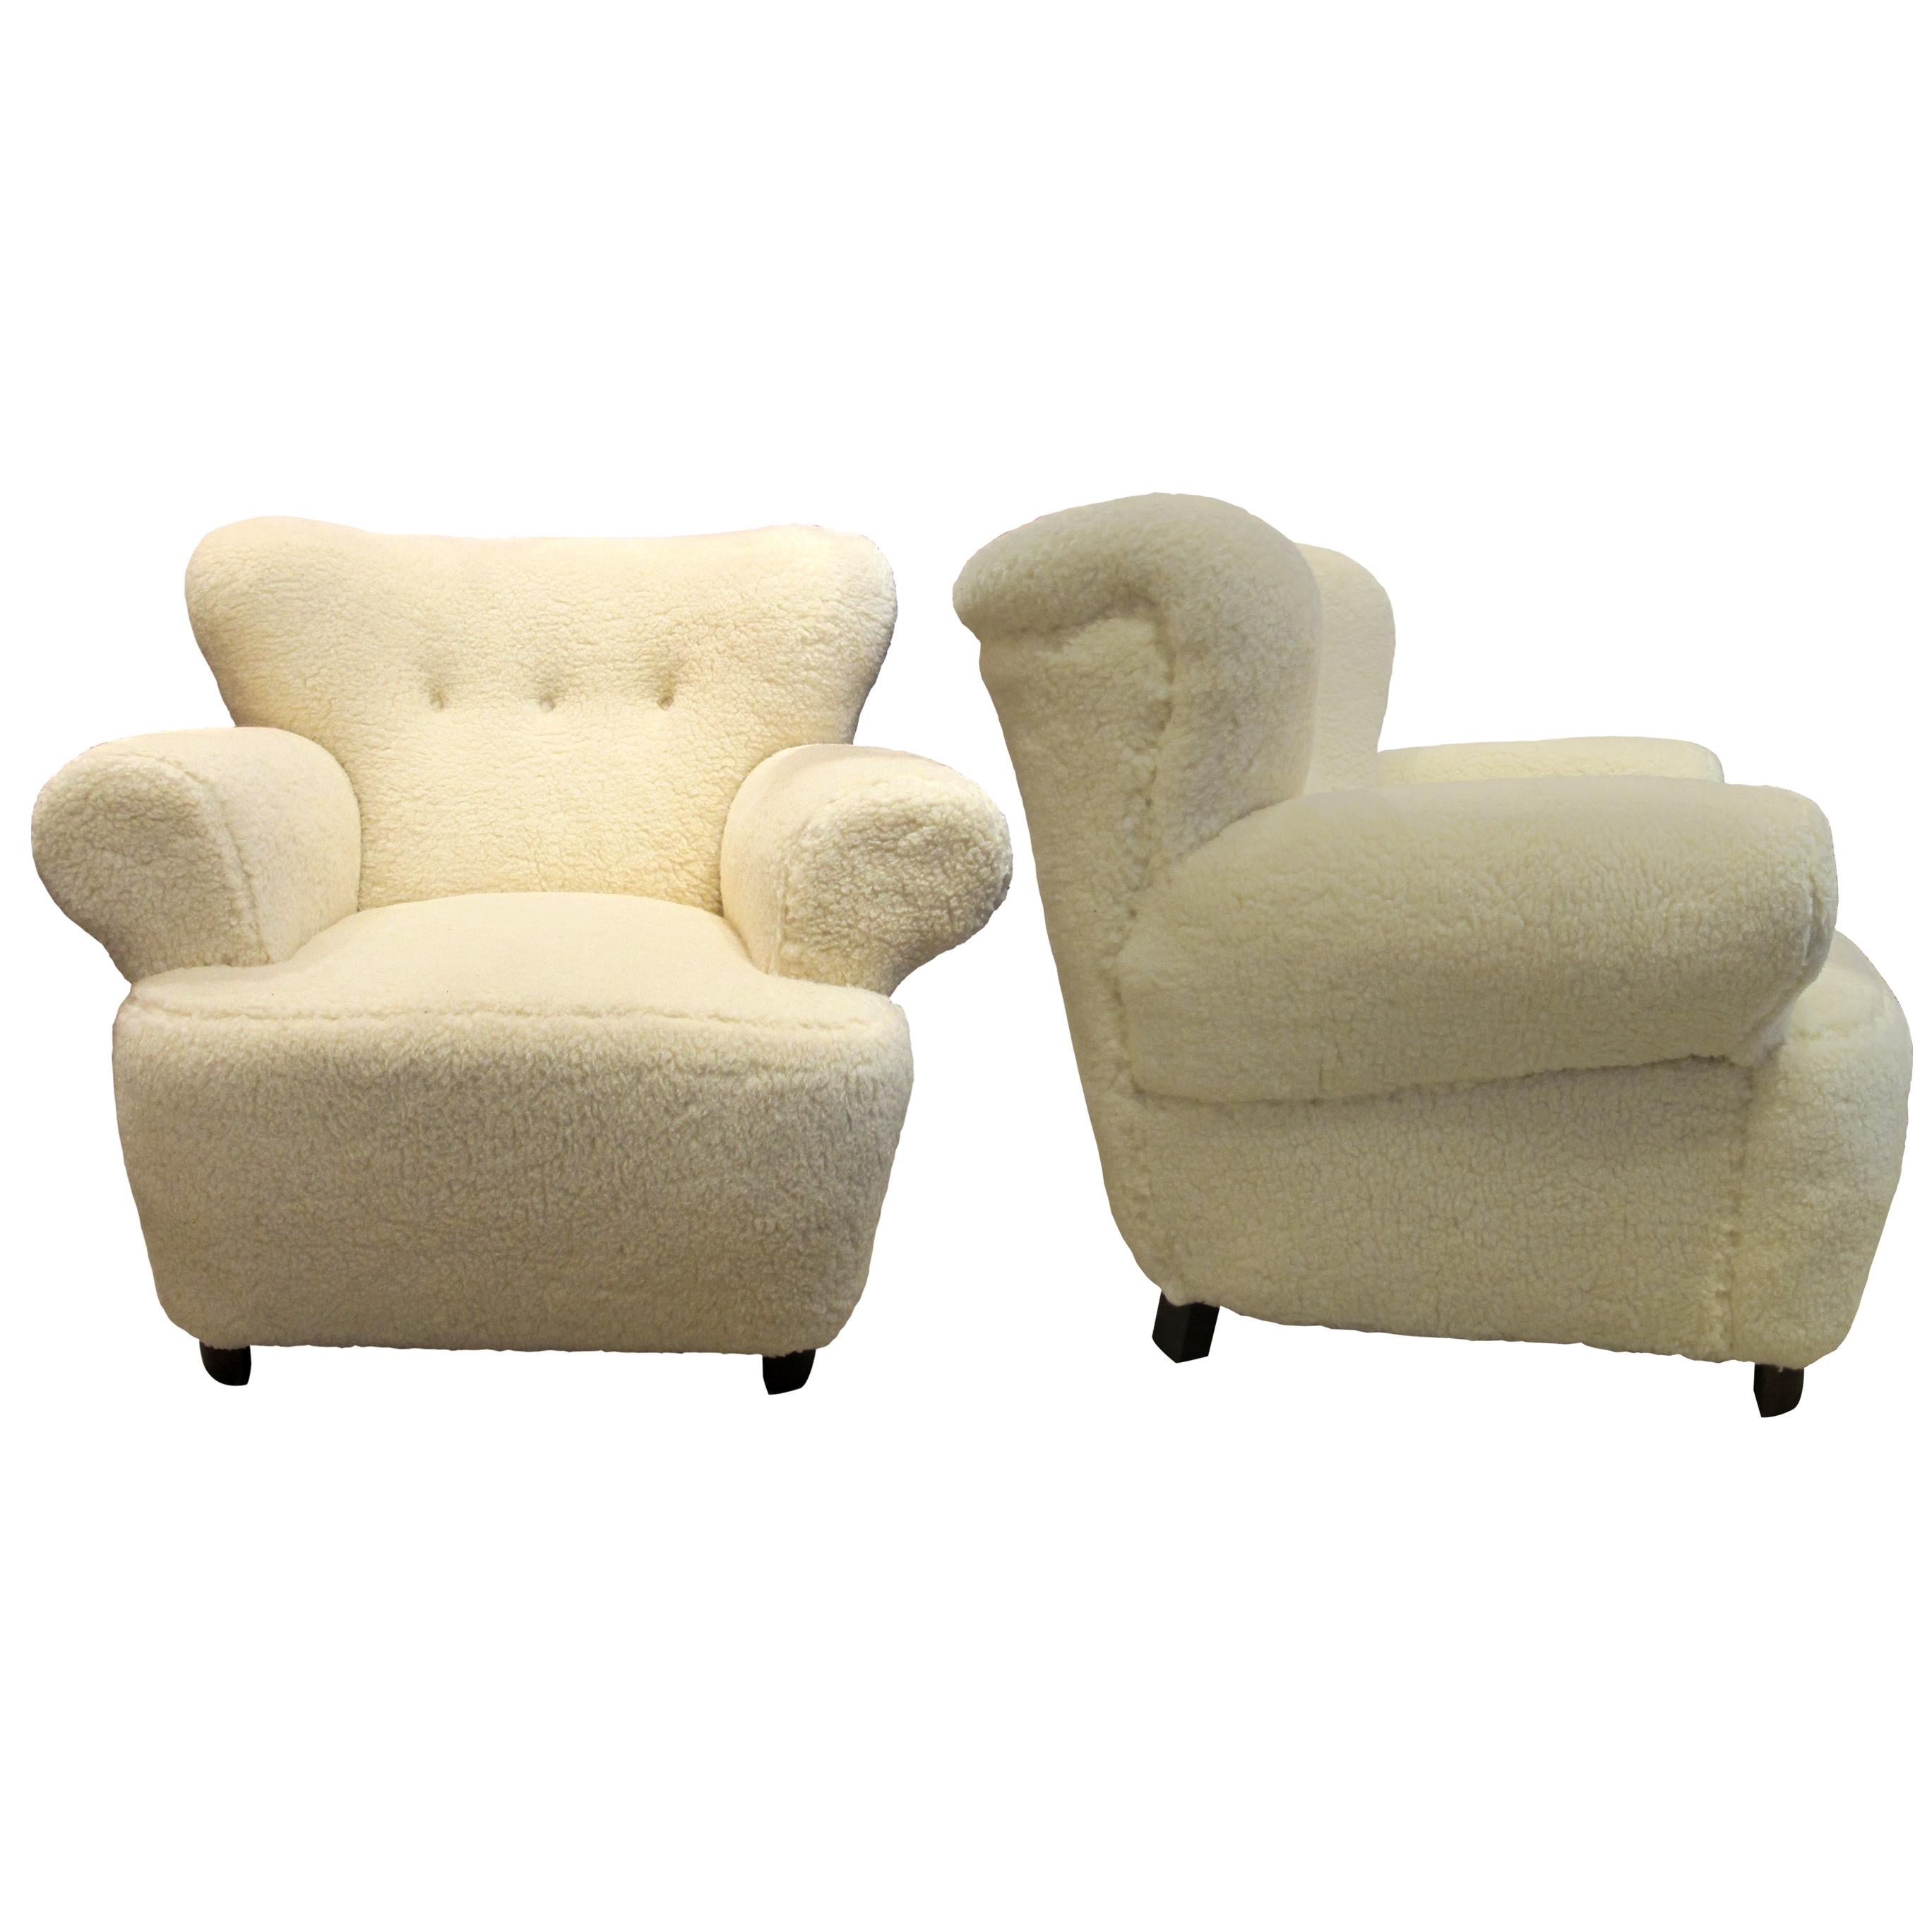 Mid-20th Century Pair of 1950s Large Swedish Armchairs Newly Upholstered in a Lamb Mix Fabric